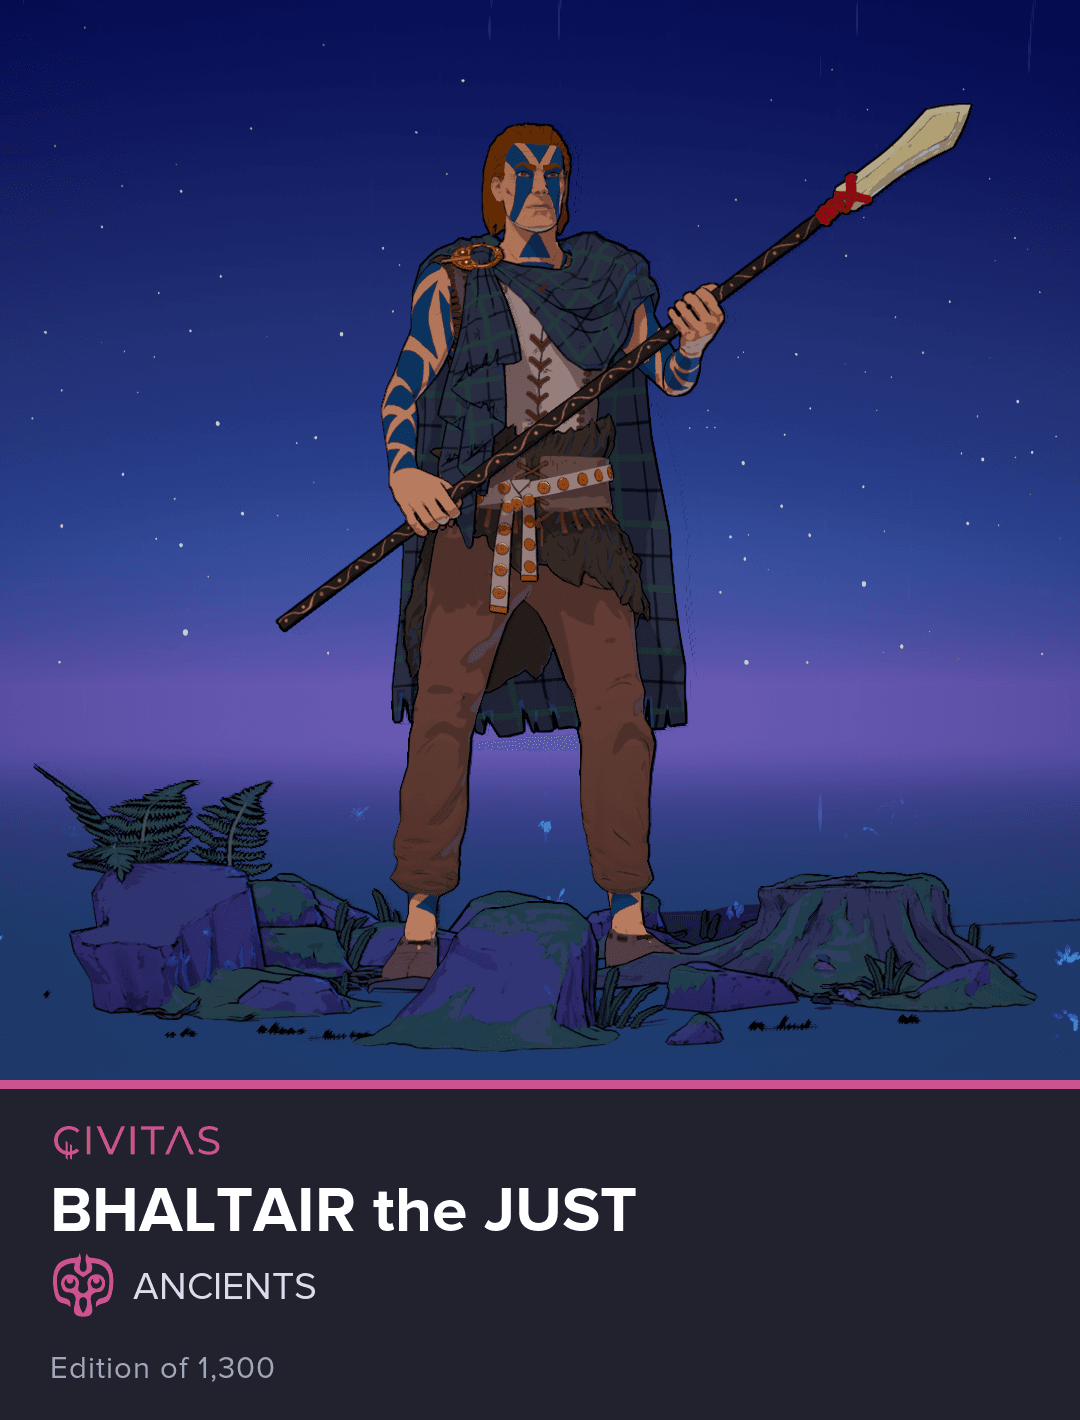 Bhaltair the Just #443